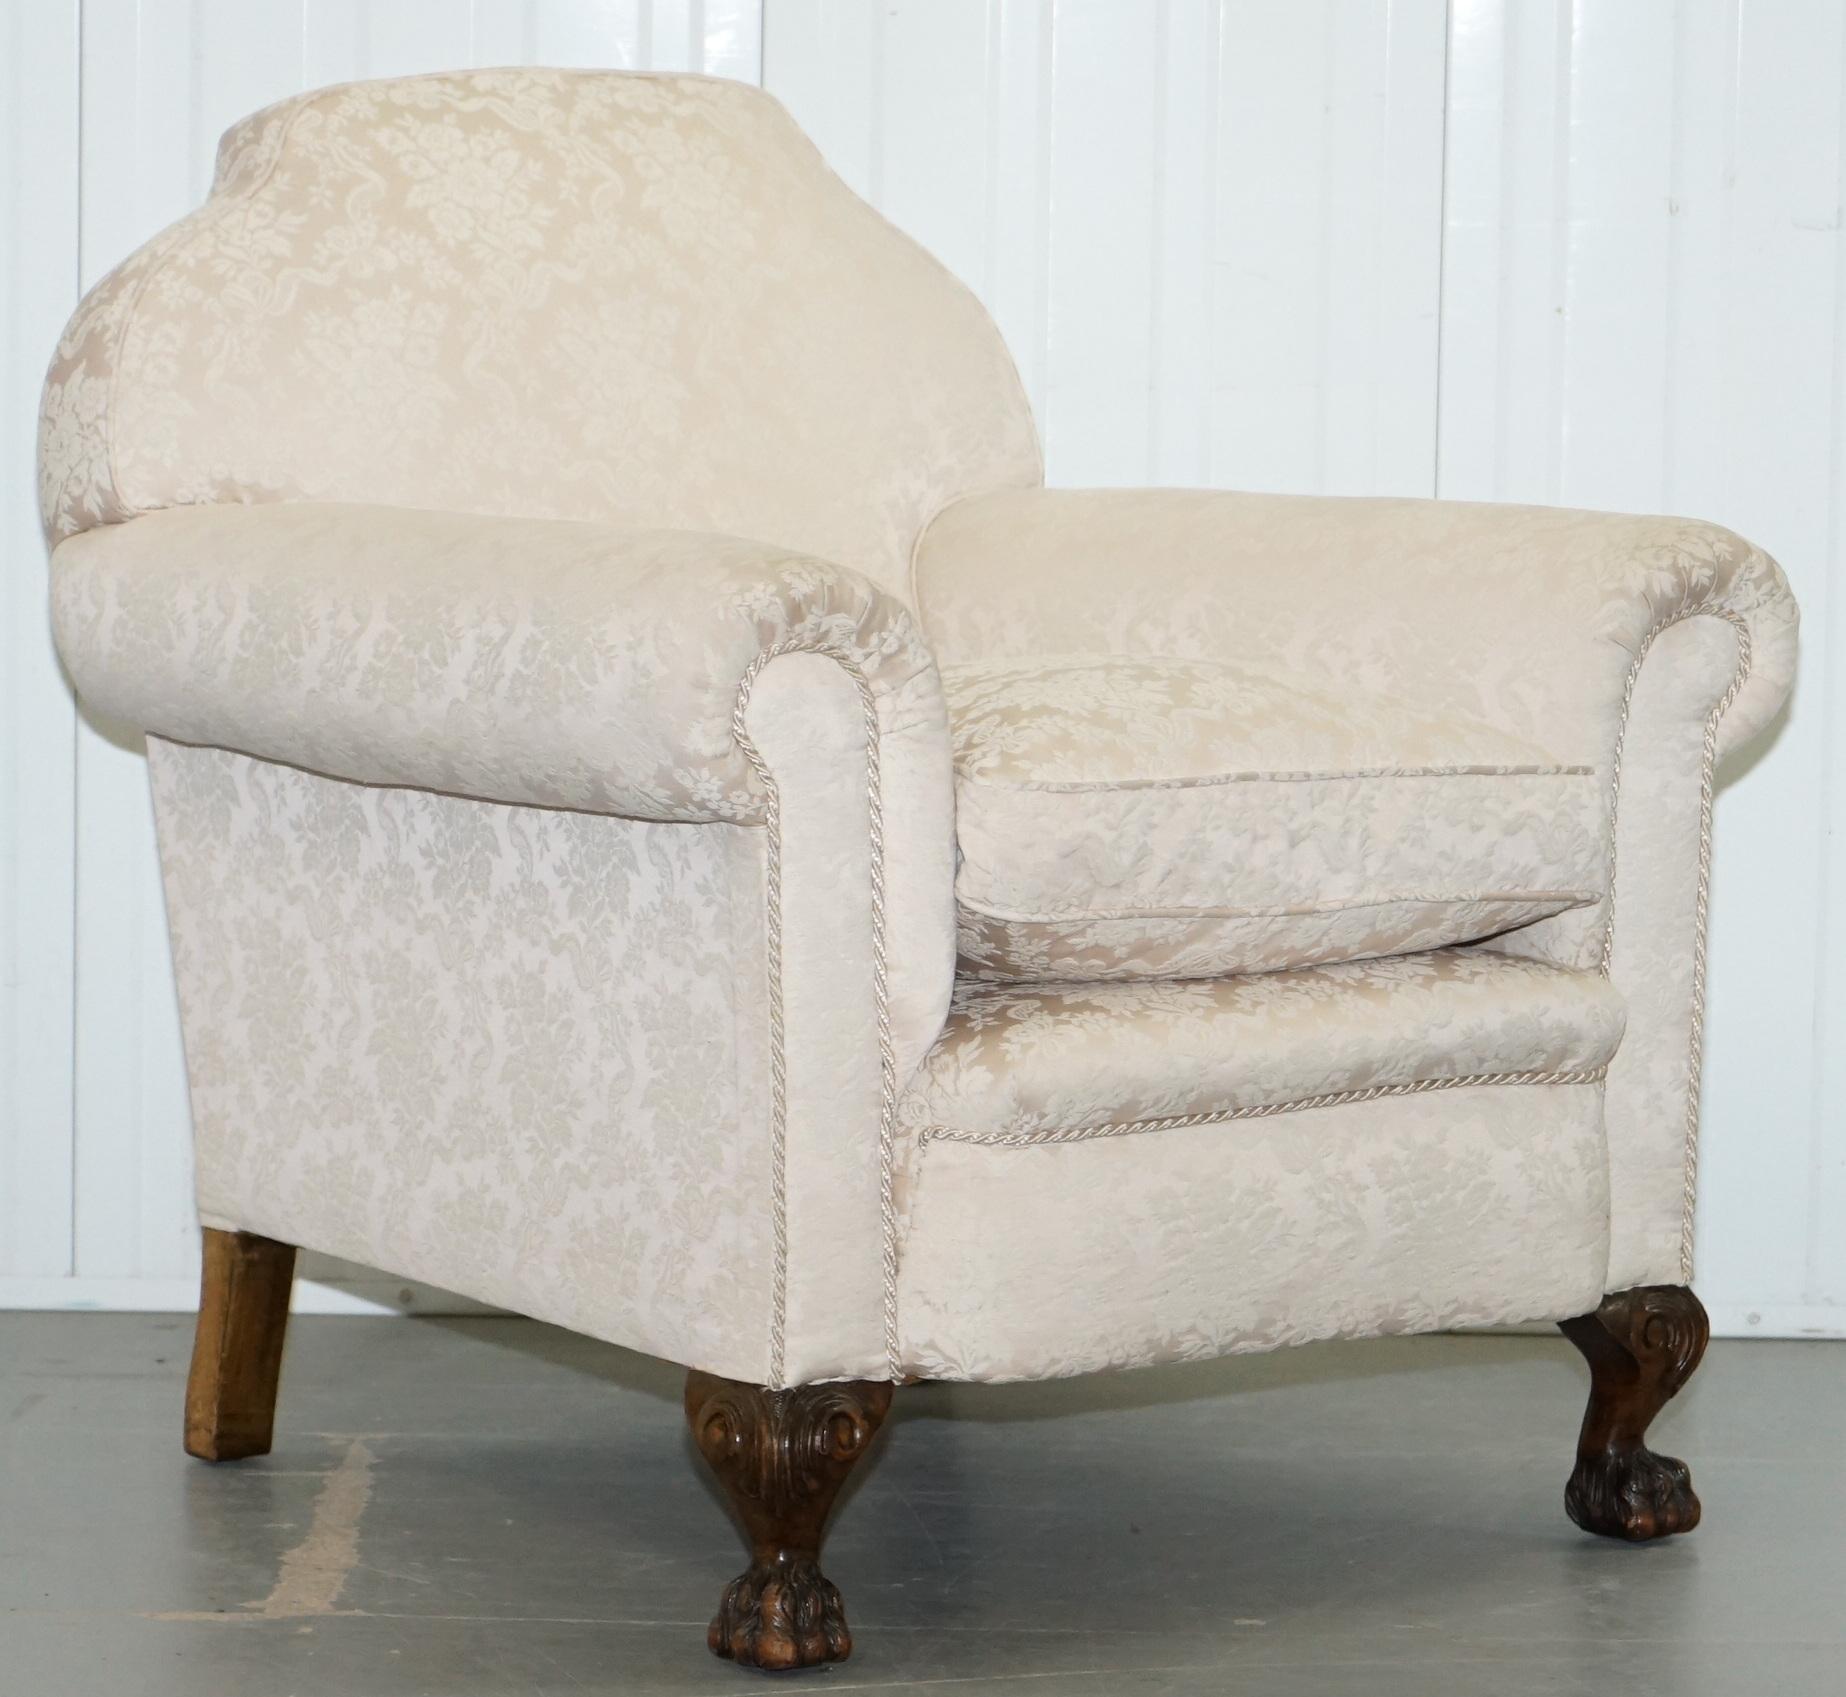 Rare Victorian Damask Upholstery Walnut Carved Lion Paw Feet Sofa Armchair Suite For Sale 13